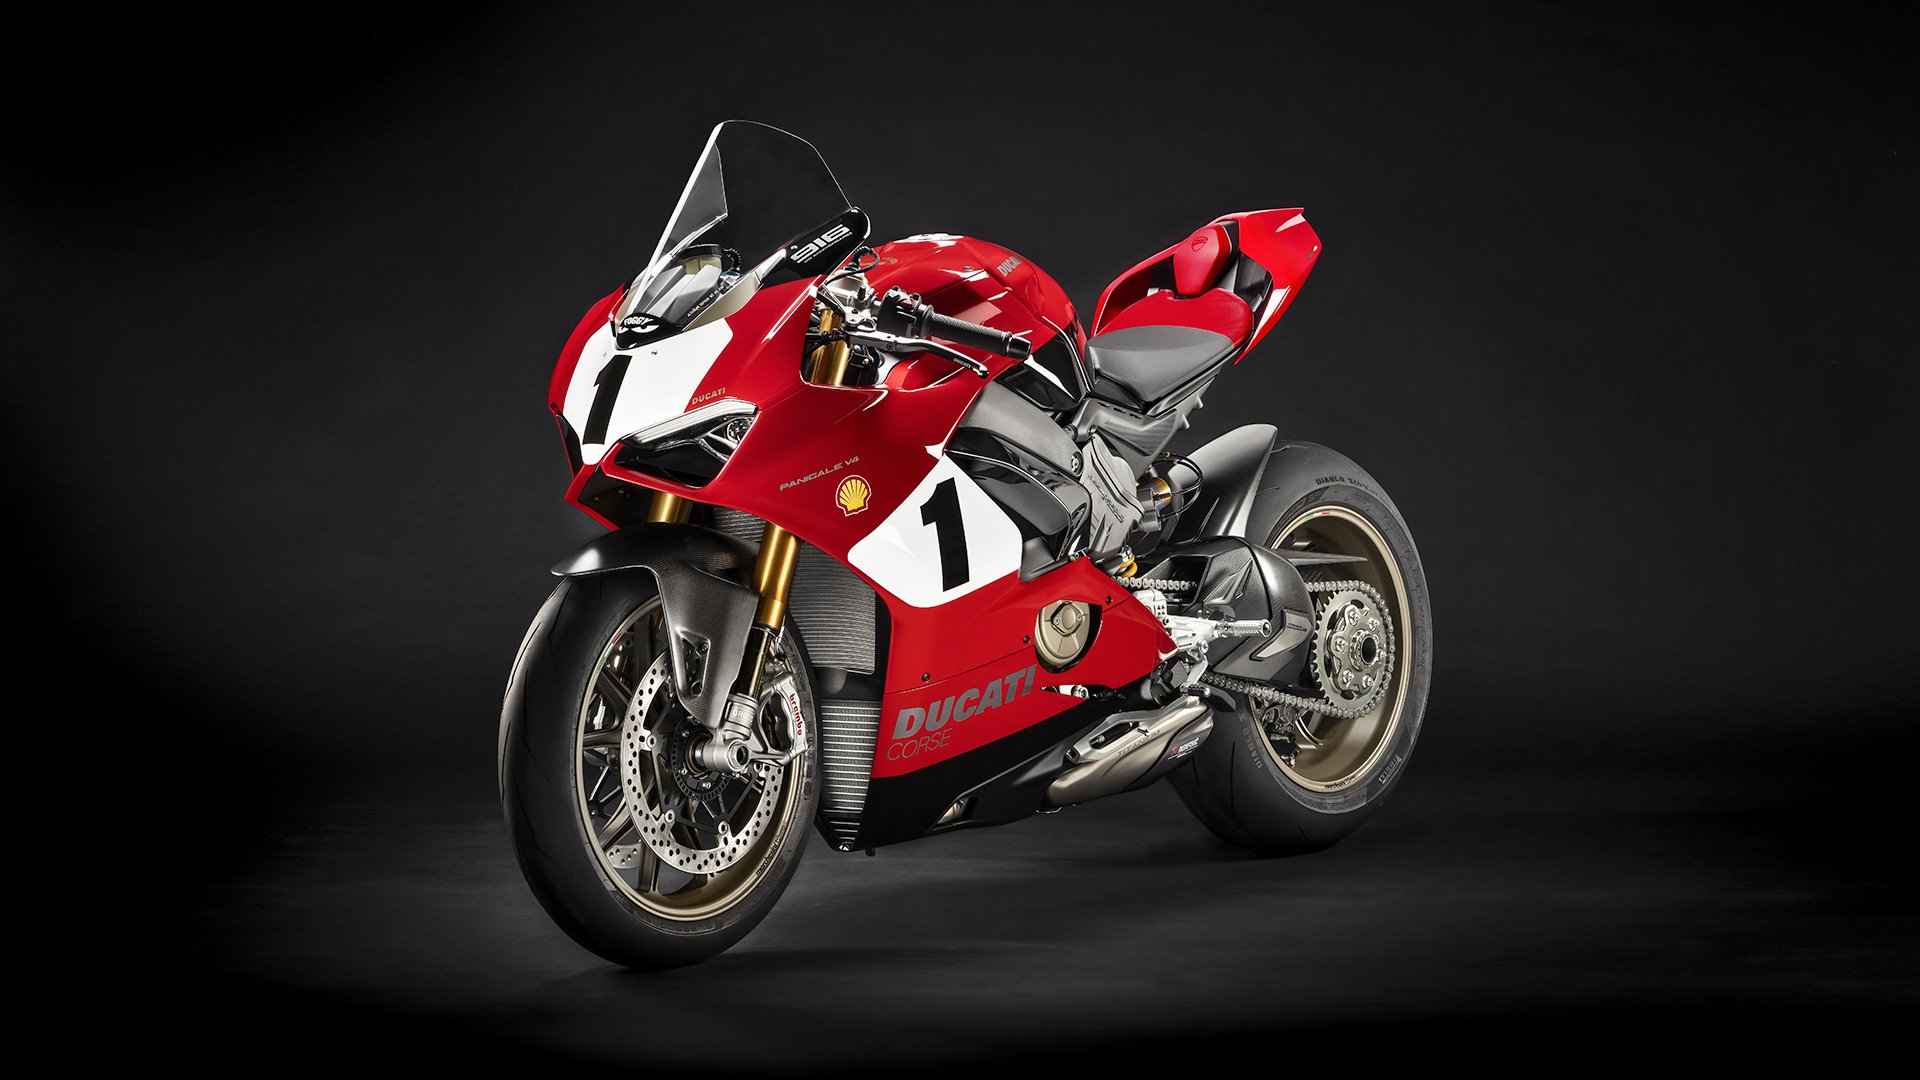 Ducati celebrates the 25th anniversary of the iconic 916 super bike with a limited edition of the Panigale V4 - Luxurylaunches